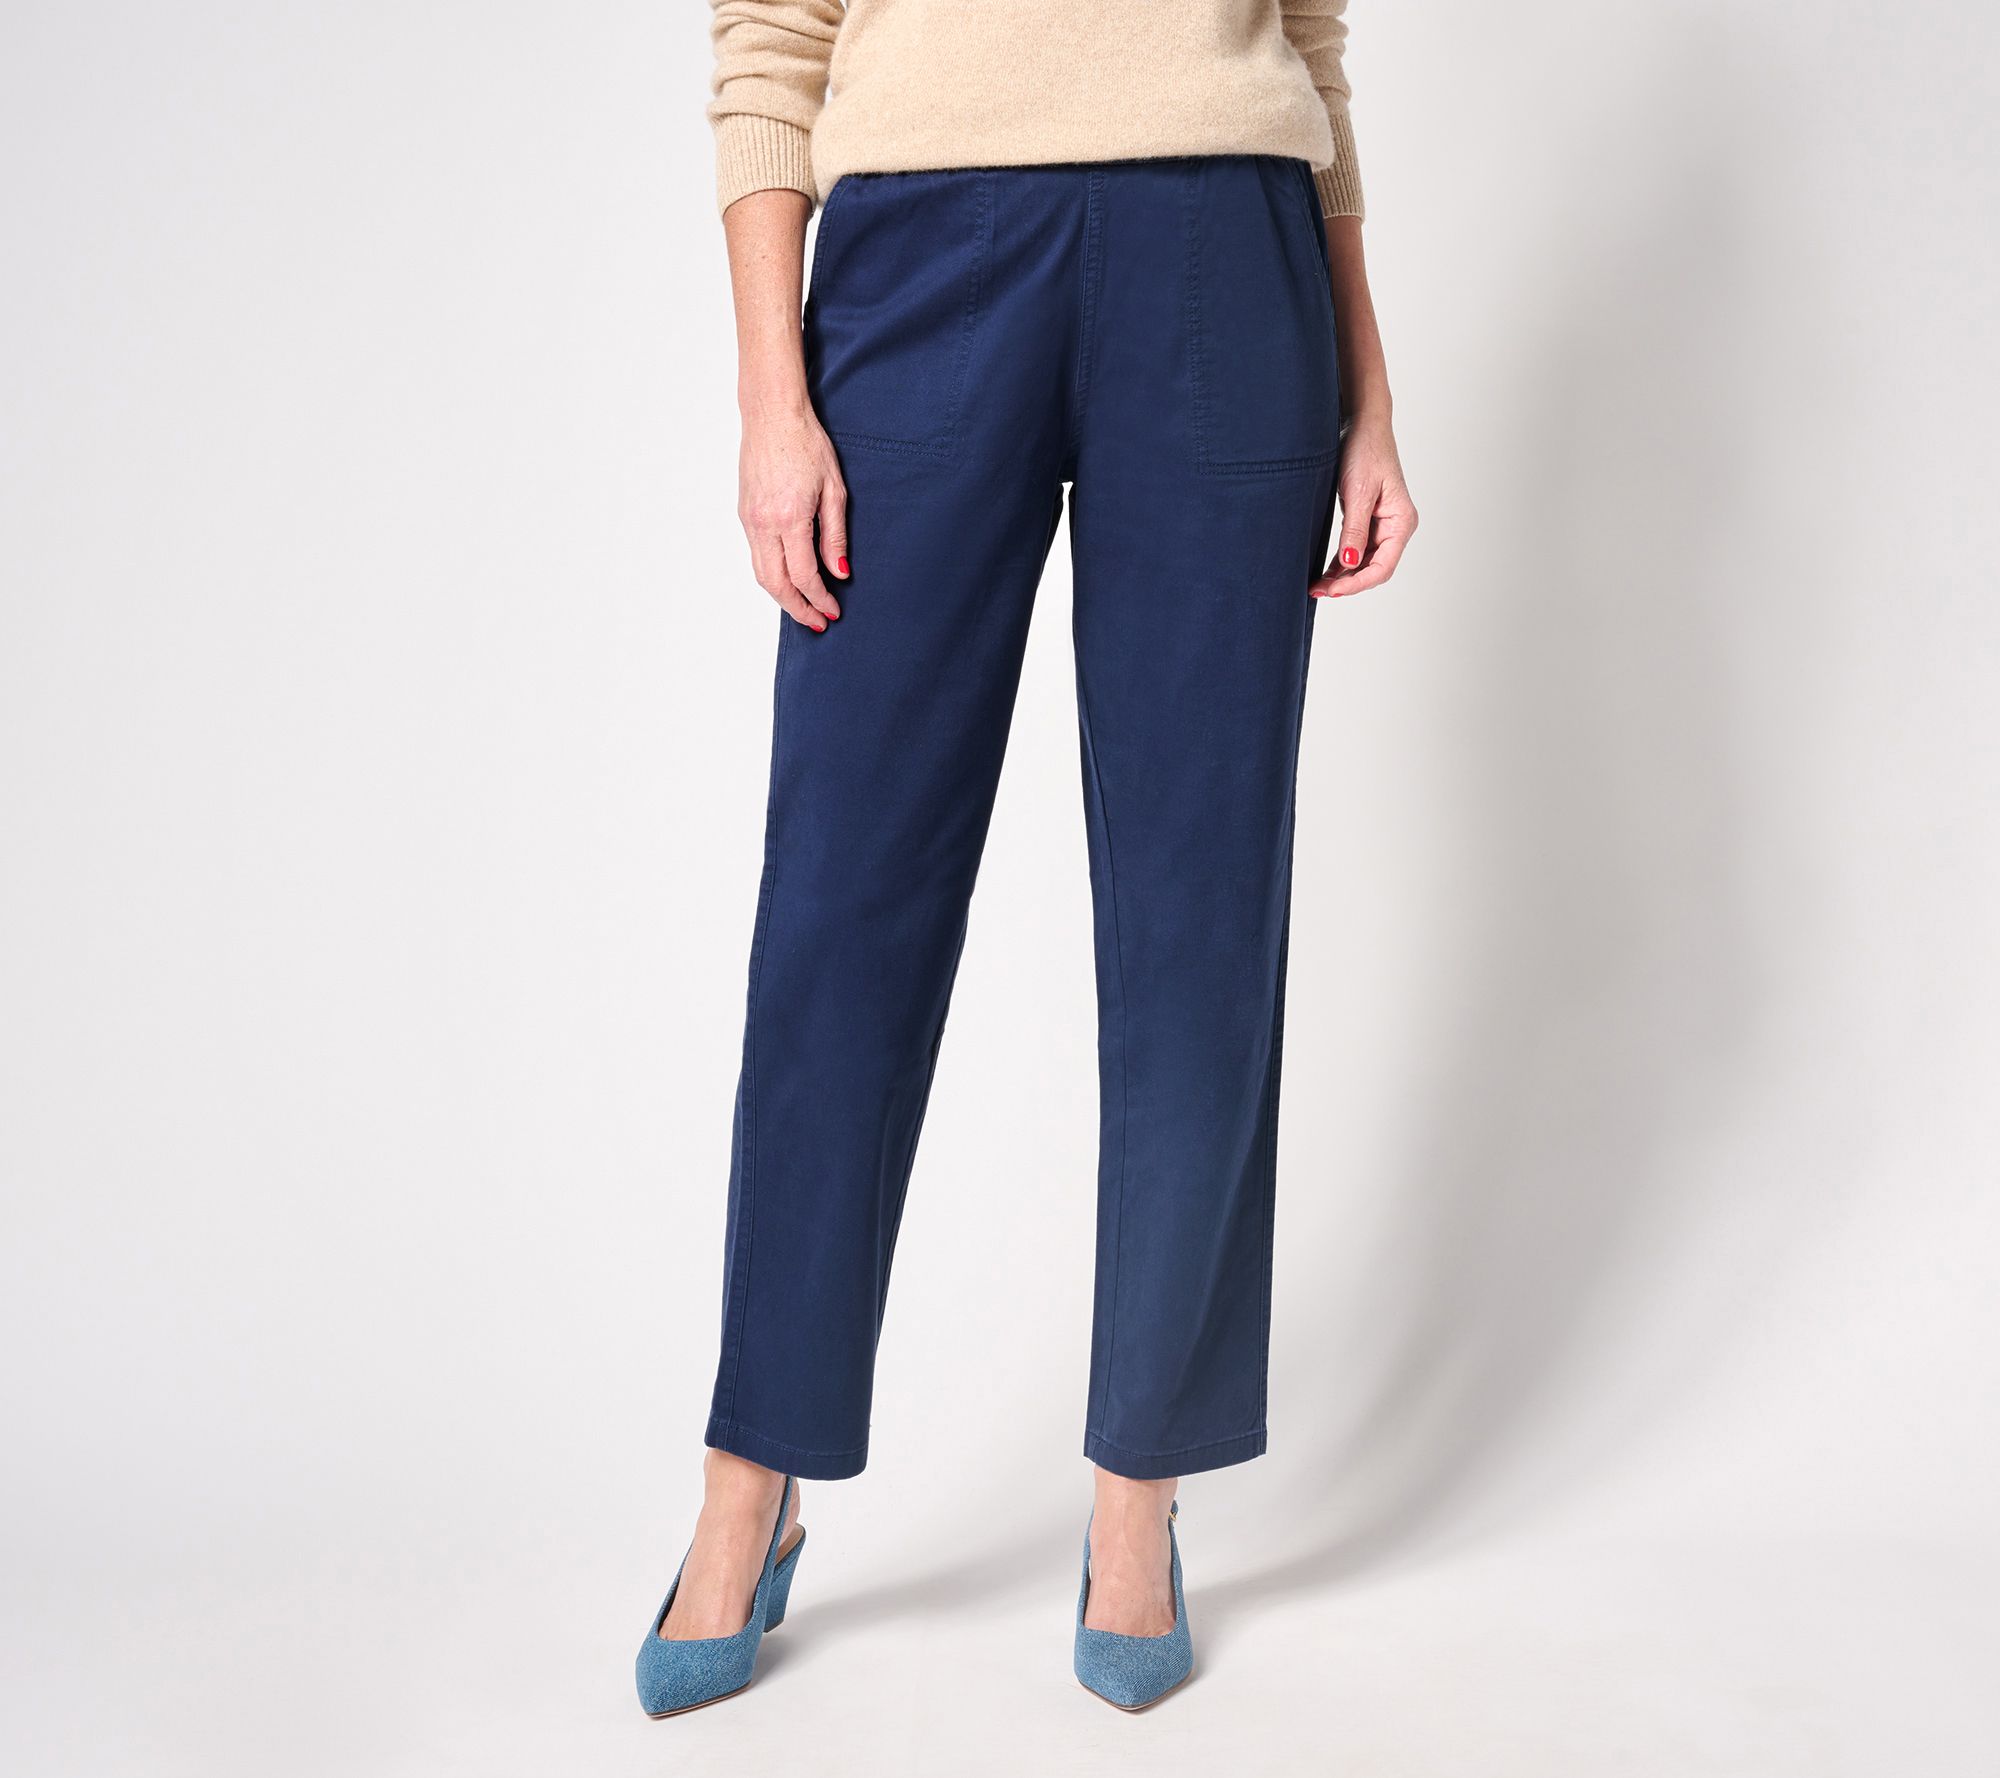 Denim & Co. Comfy Knit Air Petite Straight Crop Pant with Side Slits